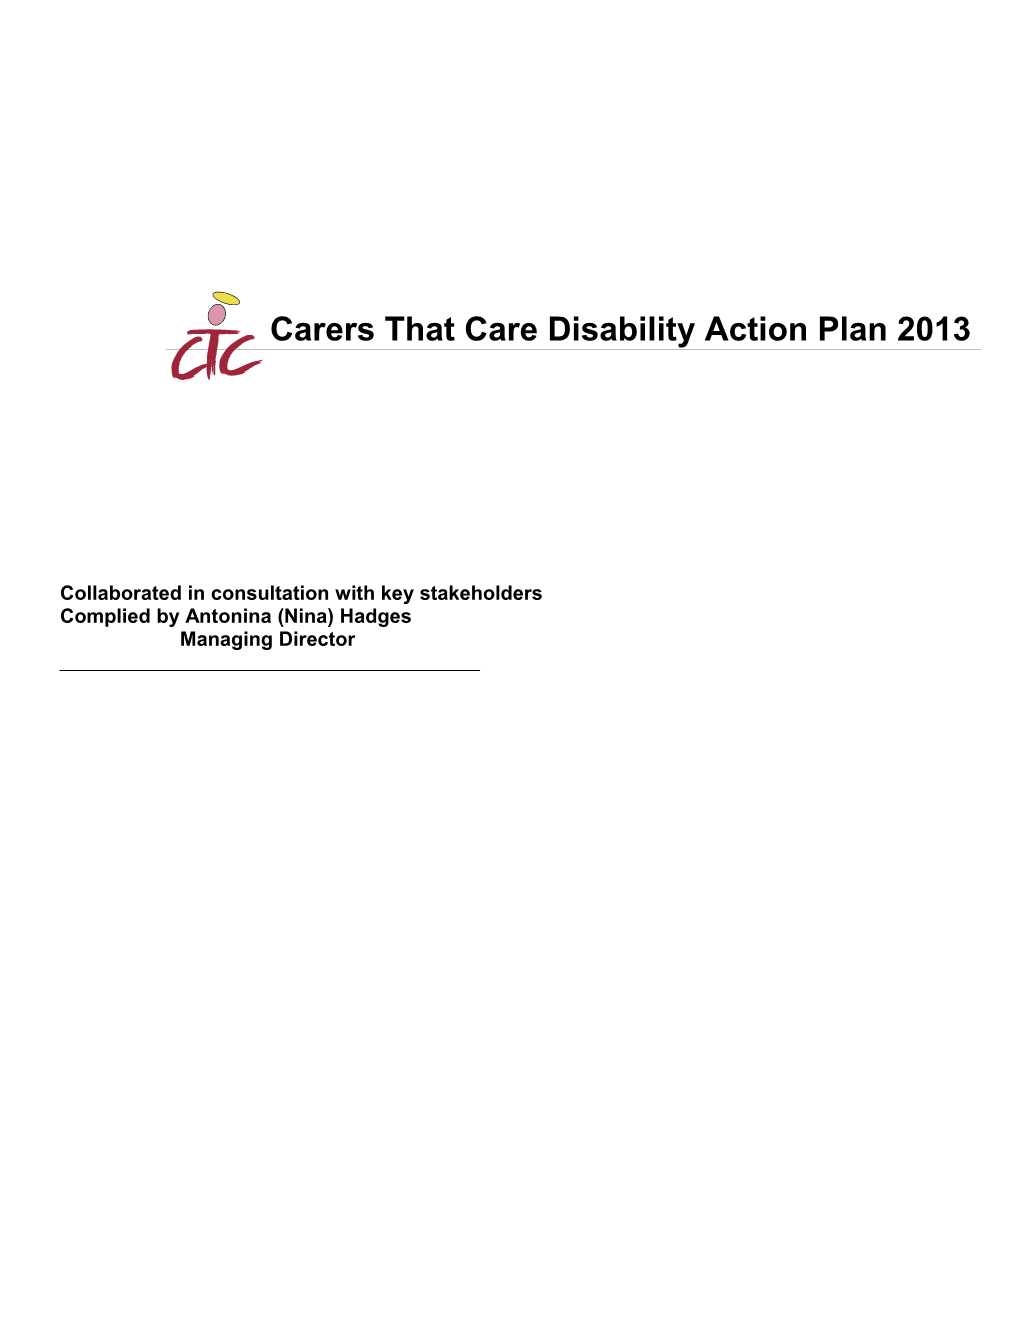 Carers That Care Disability Action Plan 2013